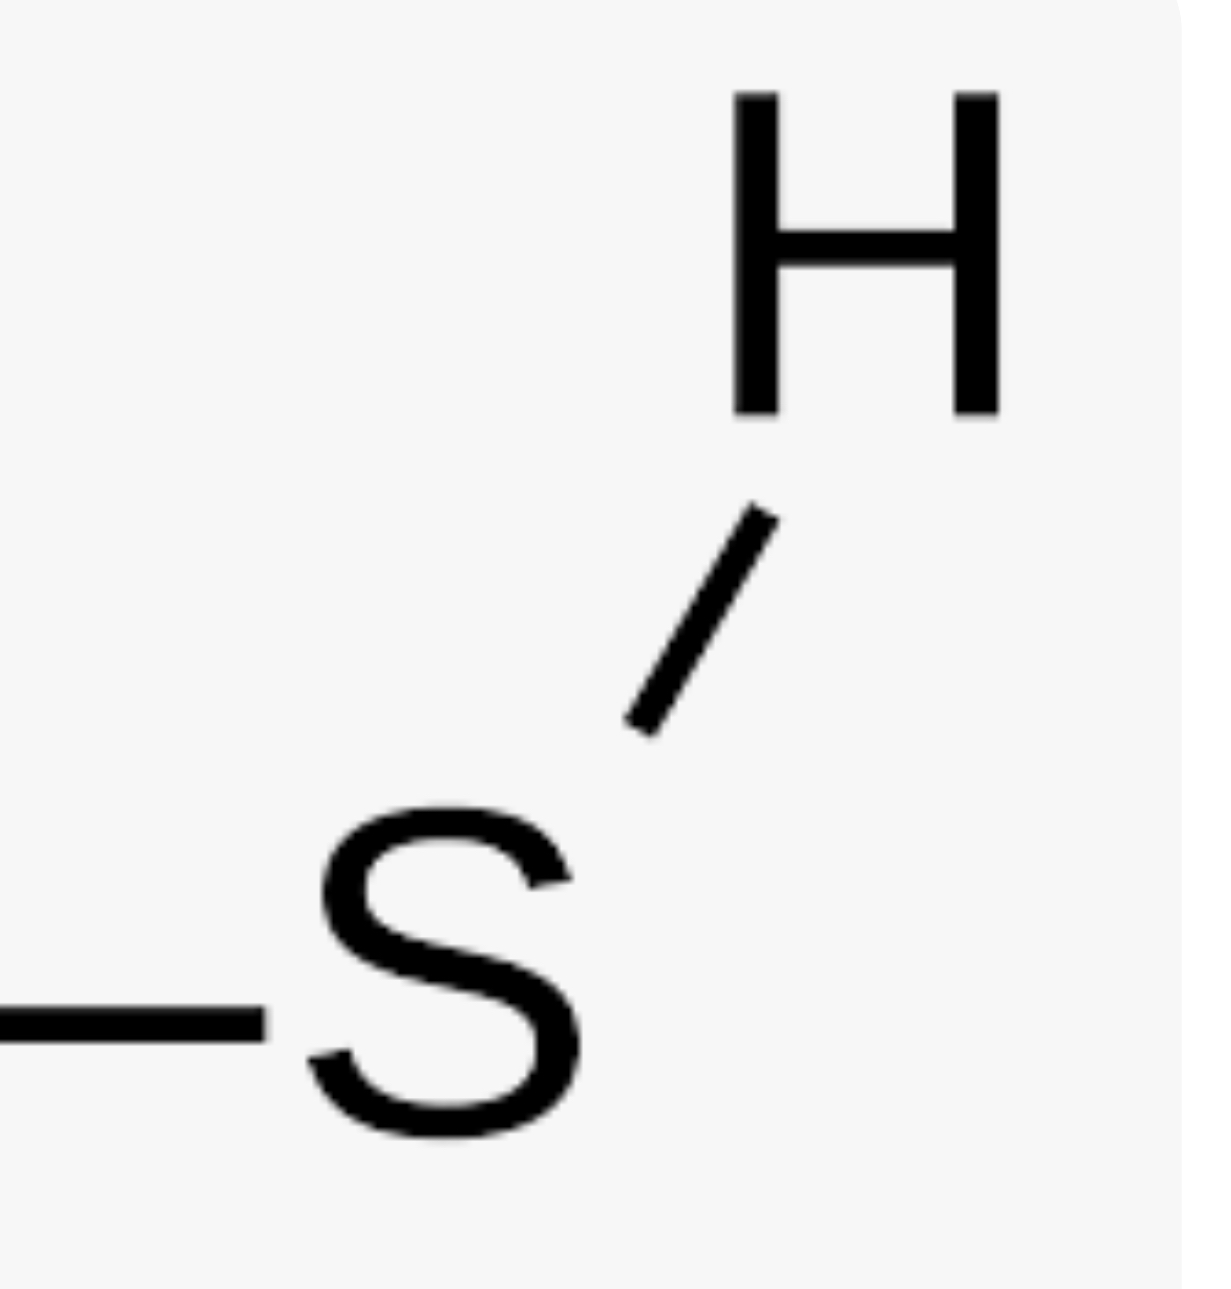 <p>-SH or HS- (forms thiols) (hydrophilic and increases compound’s solubility in water)</p>